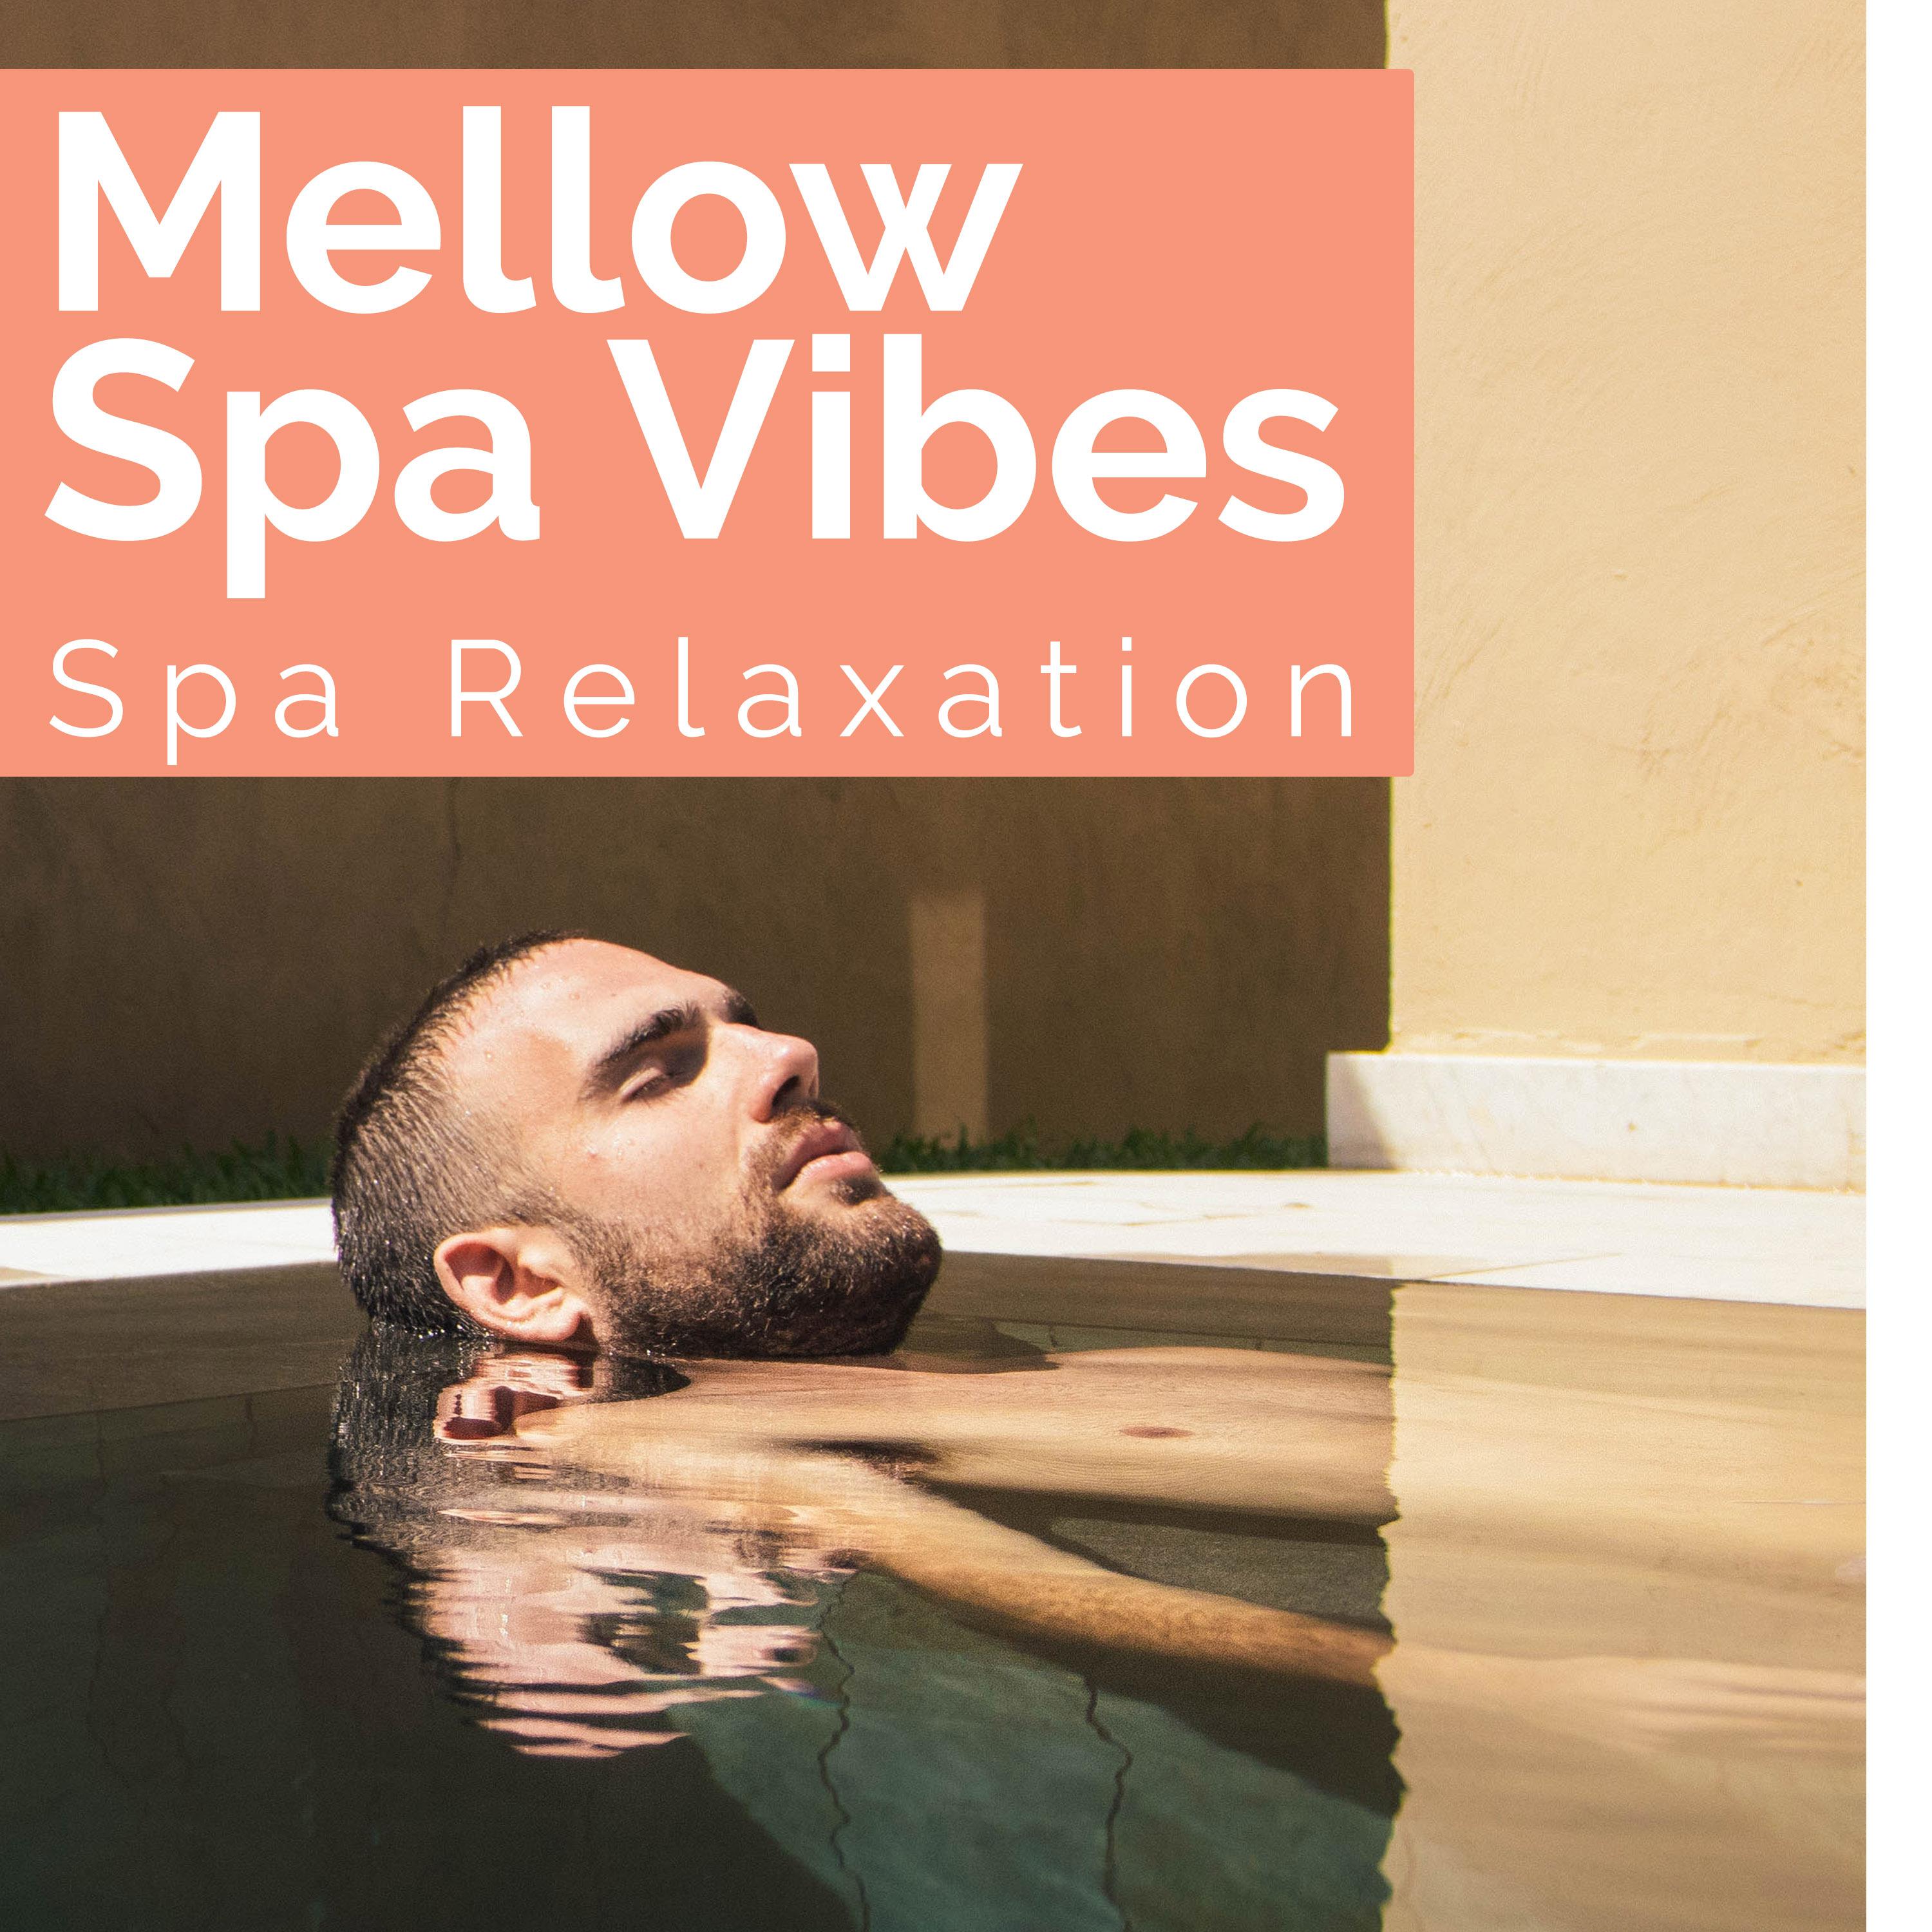 Mellow Spa Vibes